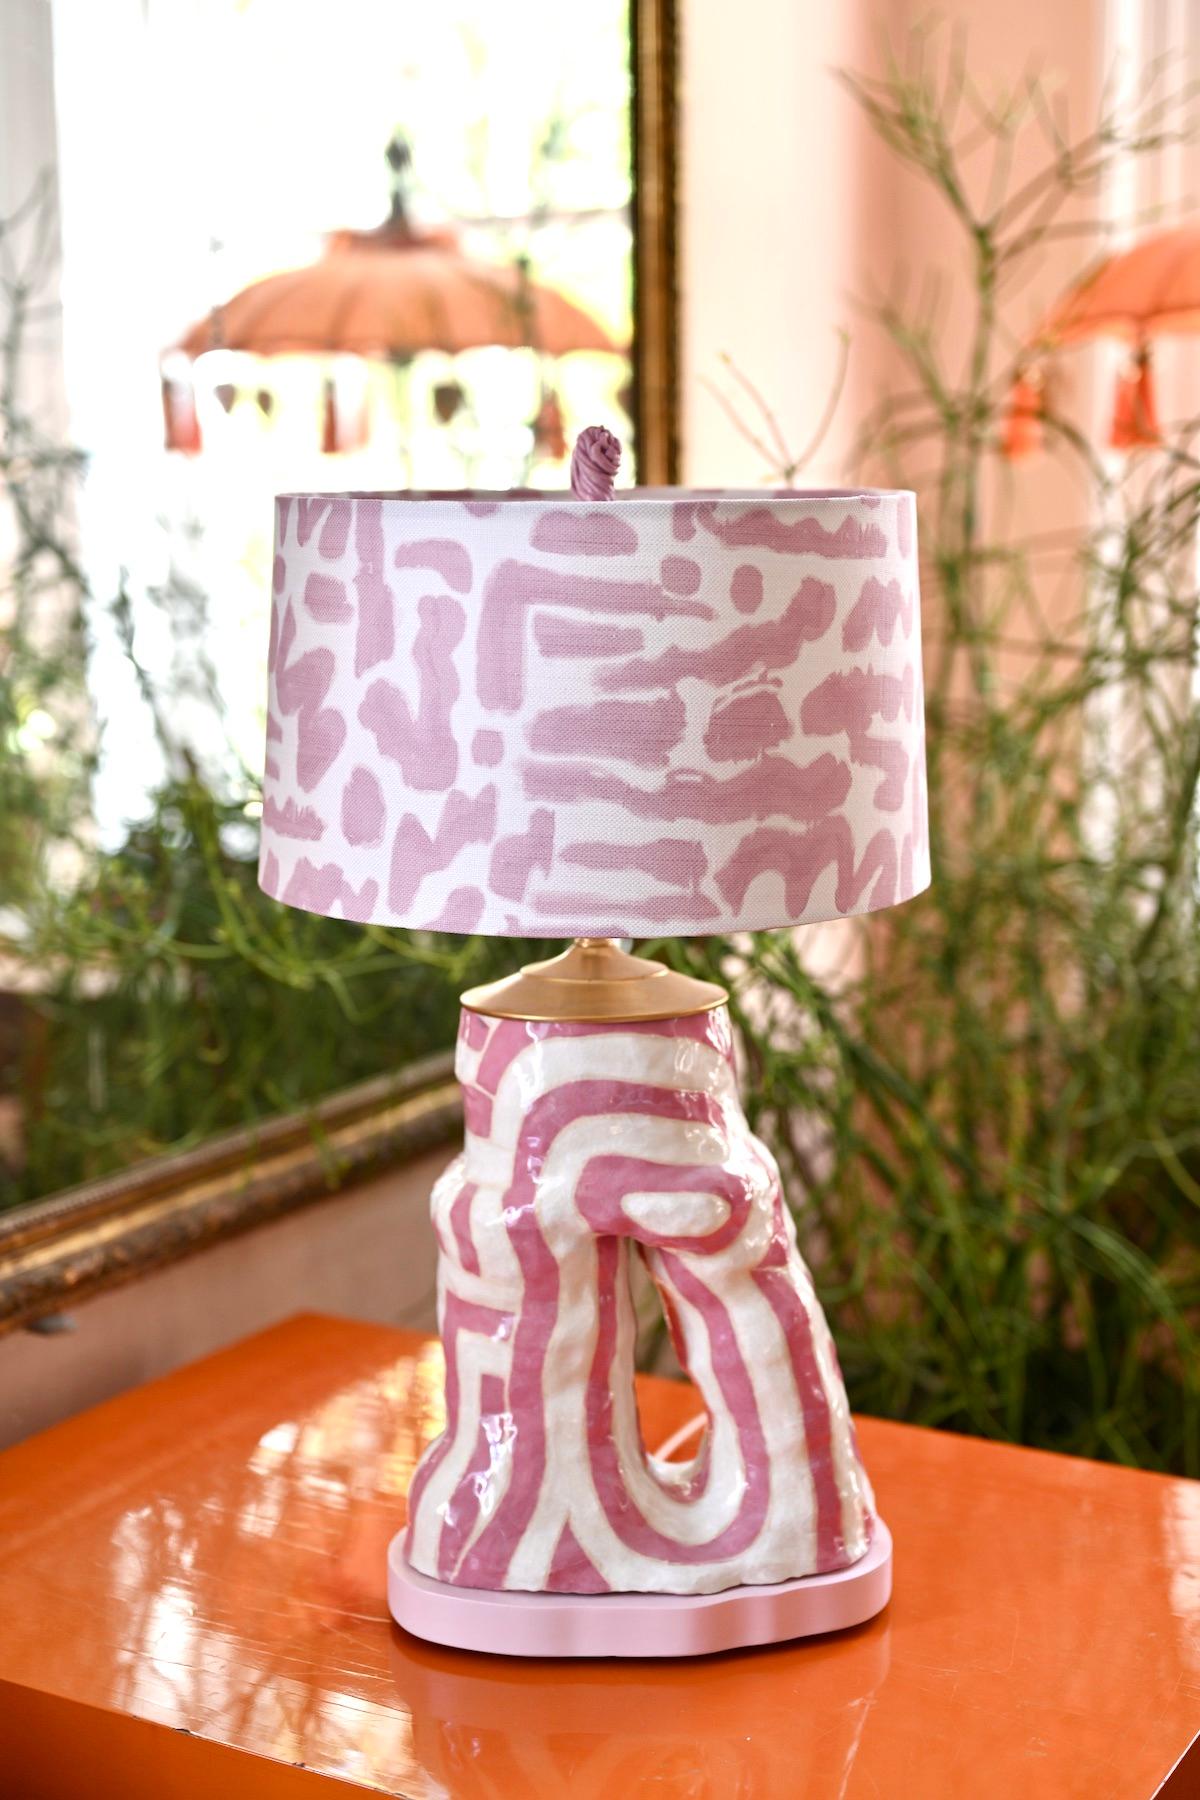 One-of-a-kind contemporary ceramic lighted forms by Abby Kasonik featuring shades made from textiles by Kiki Slaughter, inspired by her original works on canvas.

Contemporary, studio-made, hand built and painted ceramic sculptural form in pink